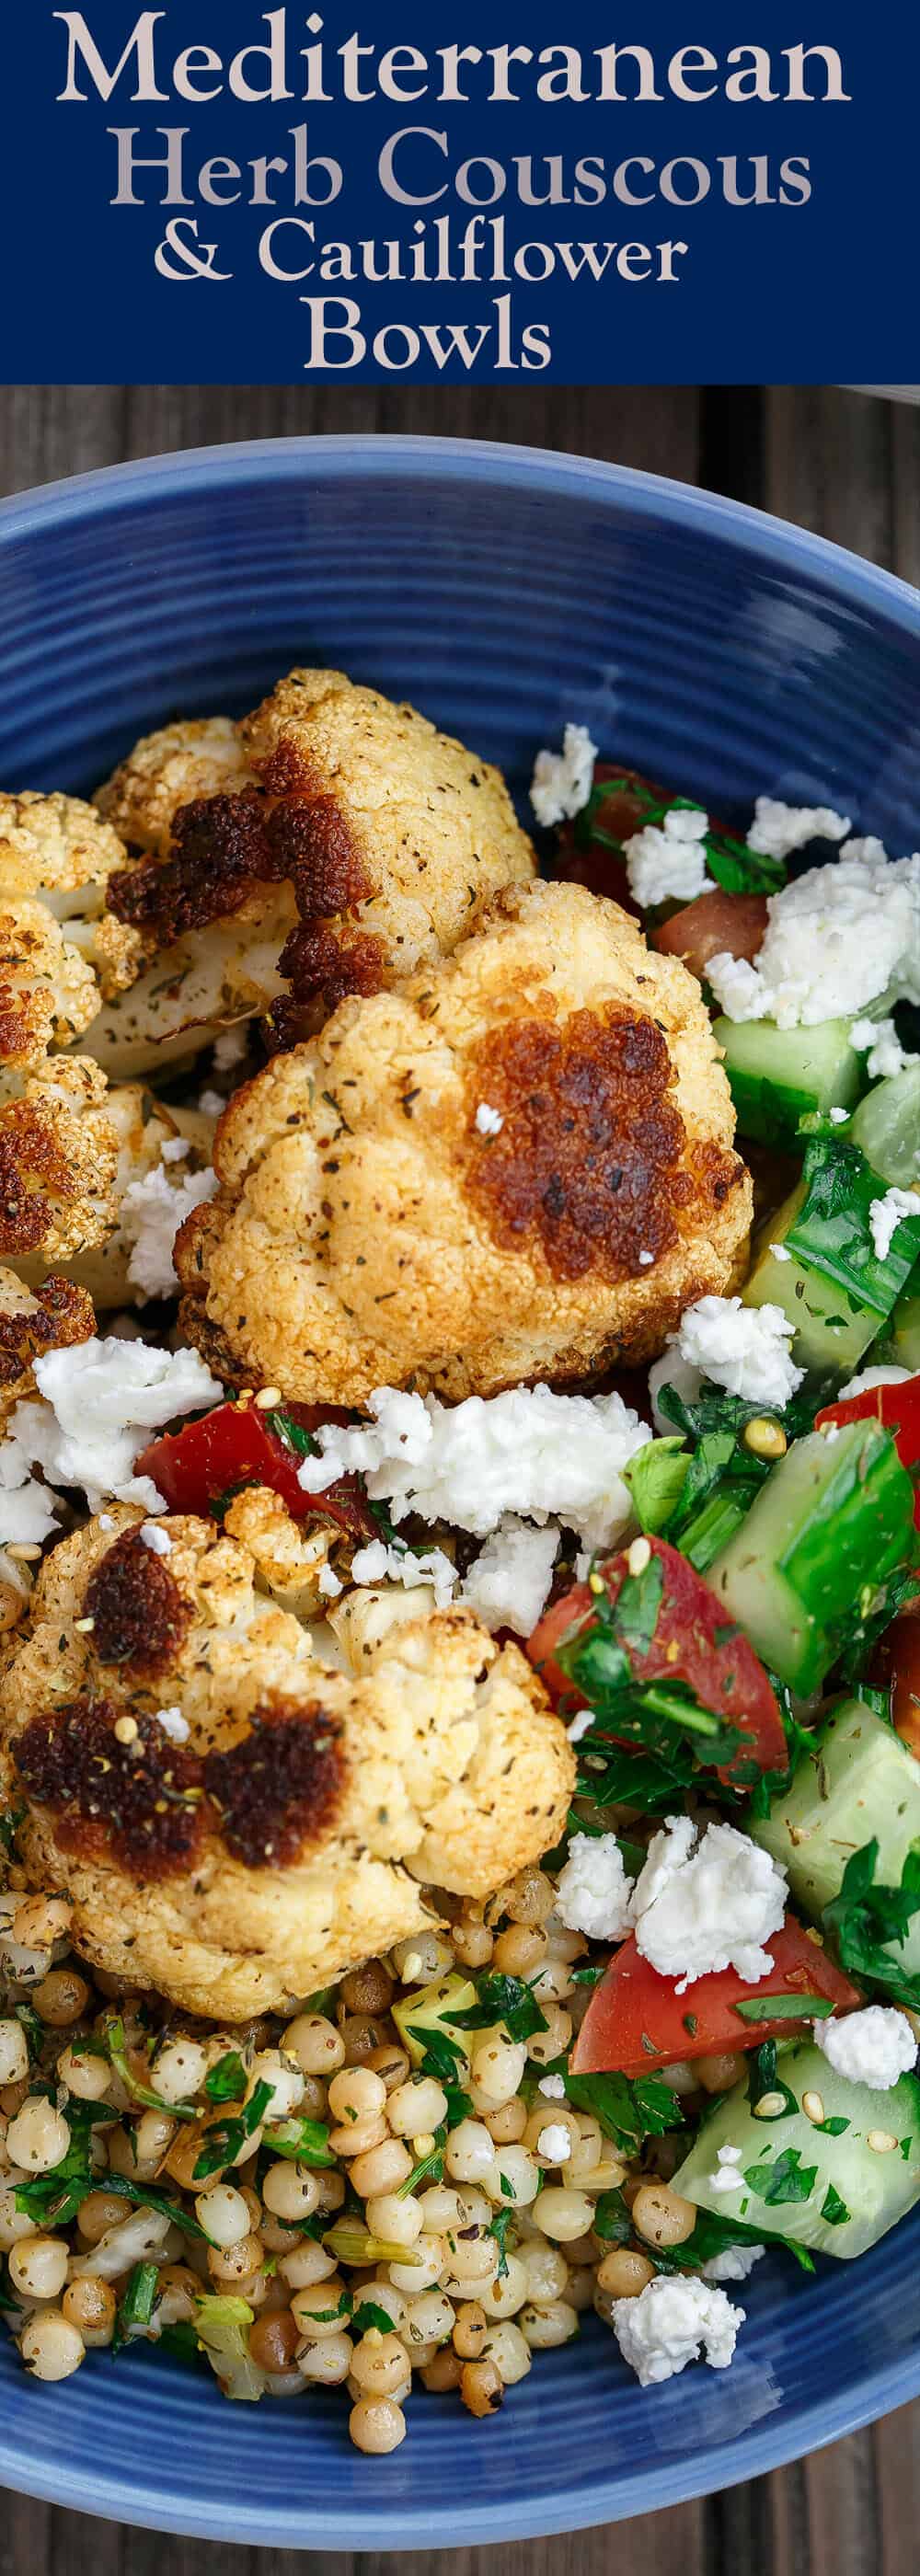 Herbed Couscous Recipe with Roasted Cauliflower | The Mediterranean Dish. Perfectly satisfying dinner bowls with flavor-packed herb couscous, perfectly roasted cauliflower, and an easy Mediterranean salad. Recipe comes with tips for best roasted cauliflower! Omit the feta for vegan dinner bowls. Recipe from TheMediterraneanDish.com #mediterraneandiet #dinnerbowls #buddahbowl #couscous #roastedcauliflower #vegetarian #vegan 